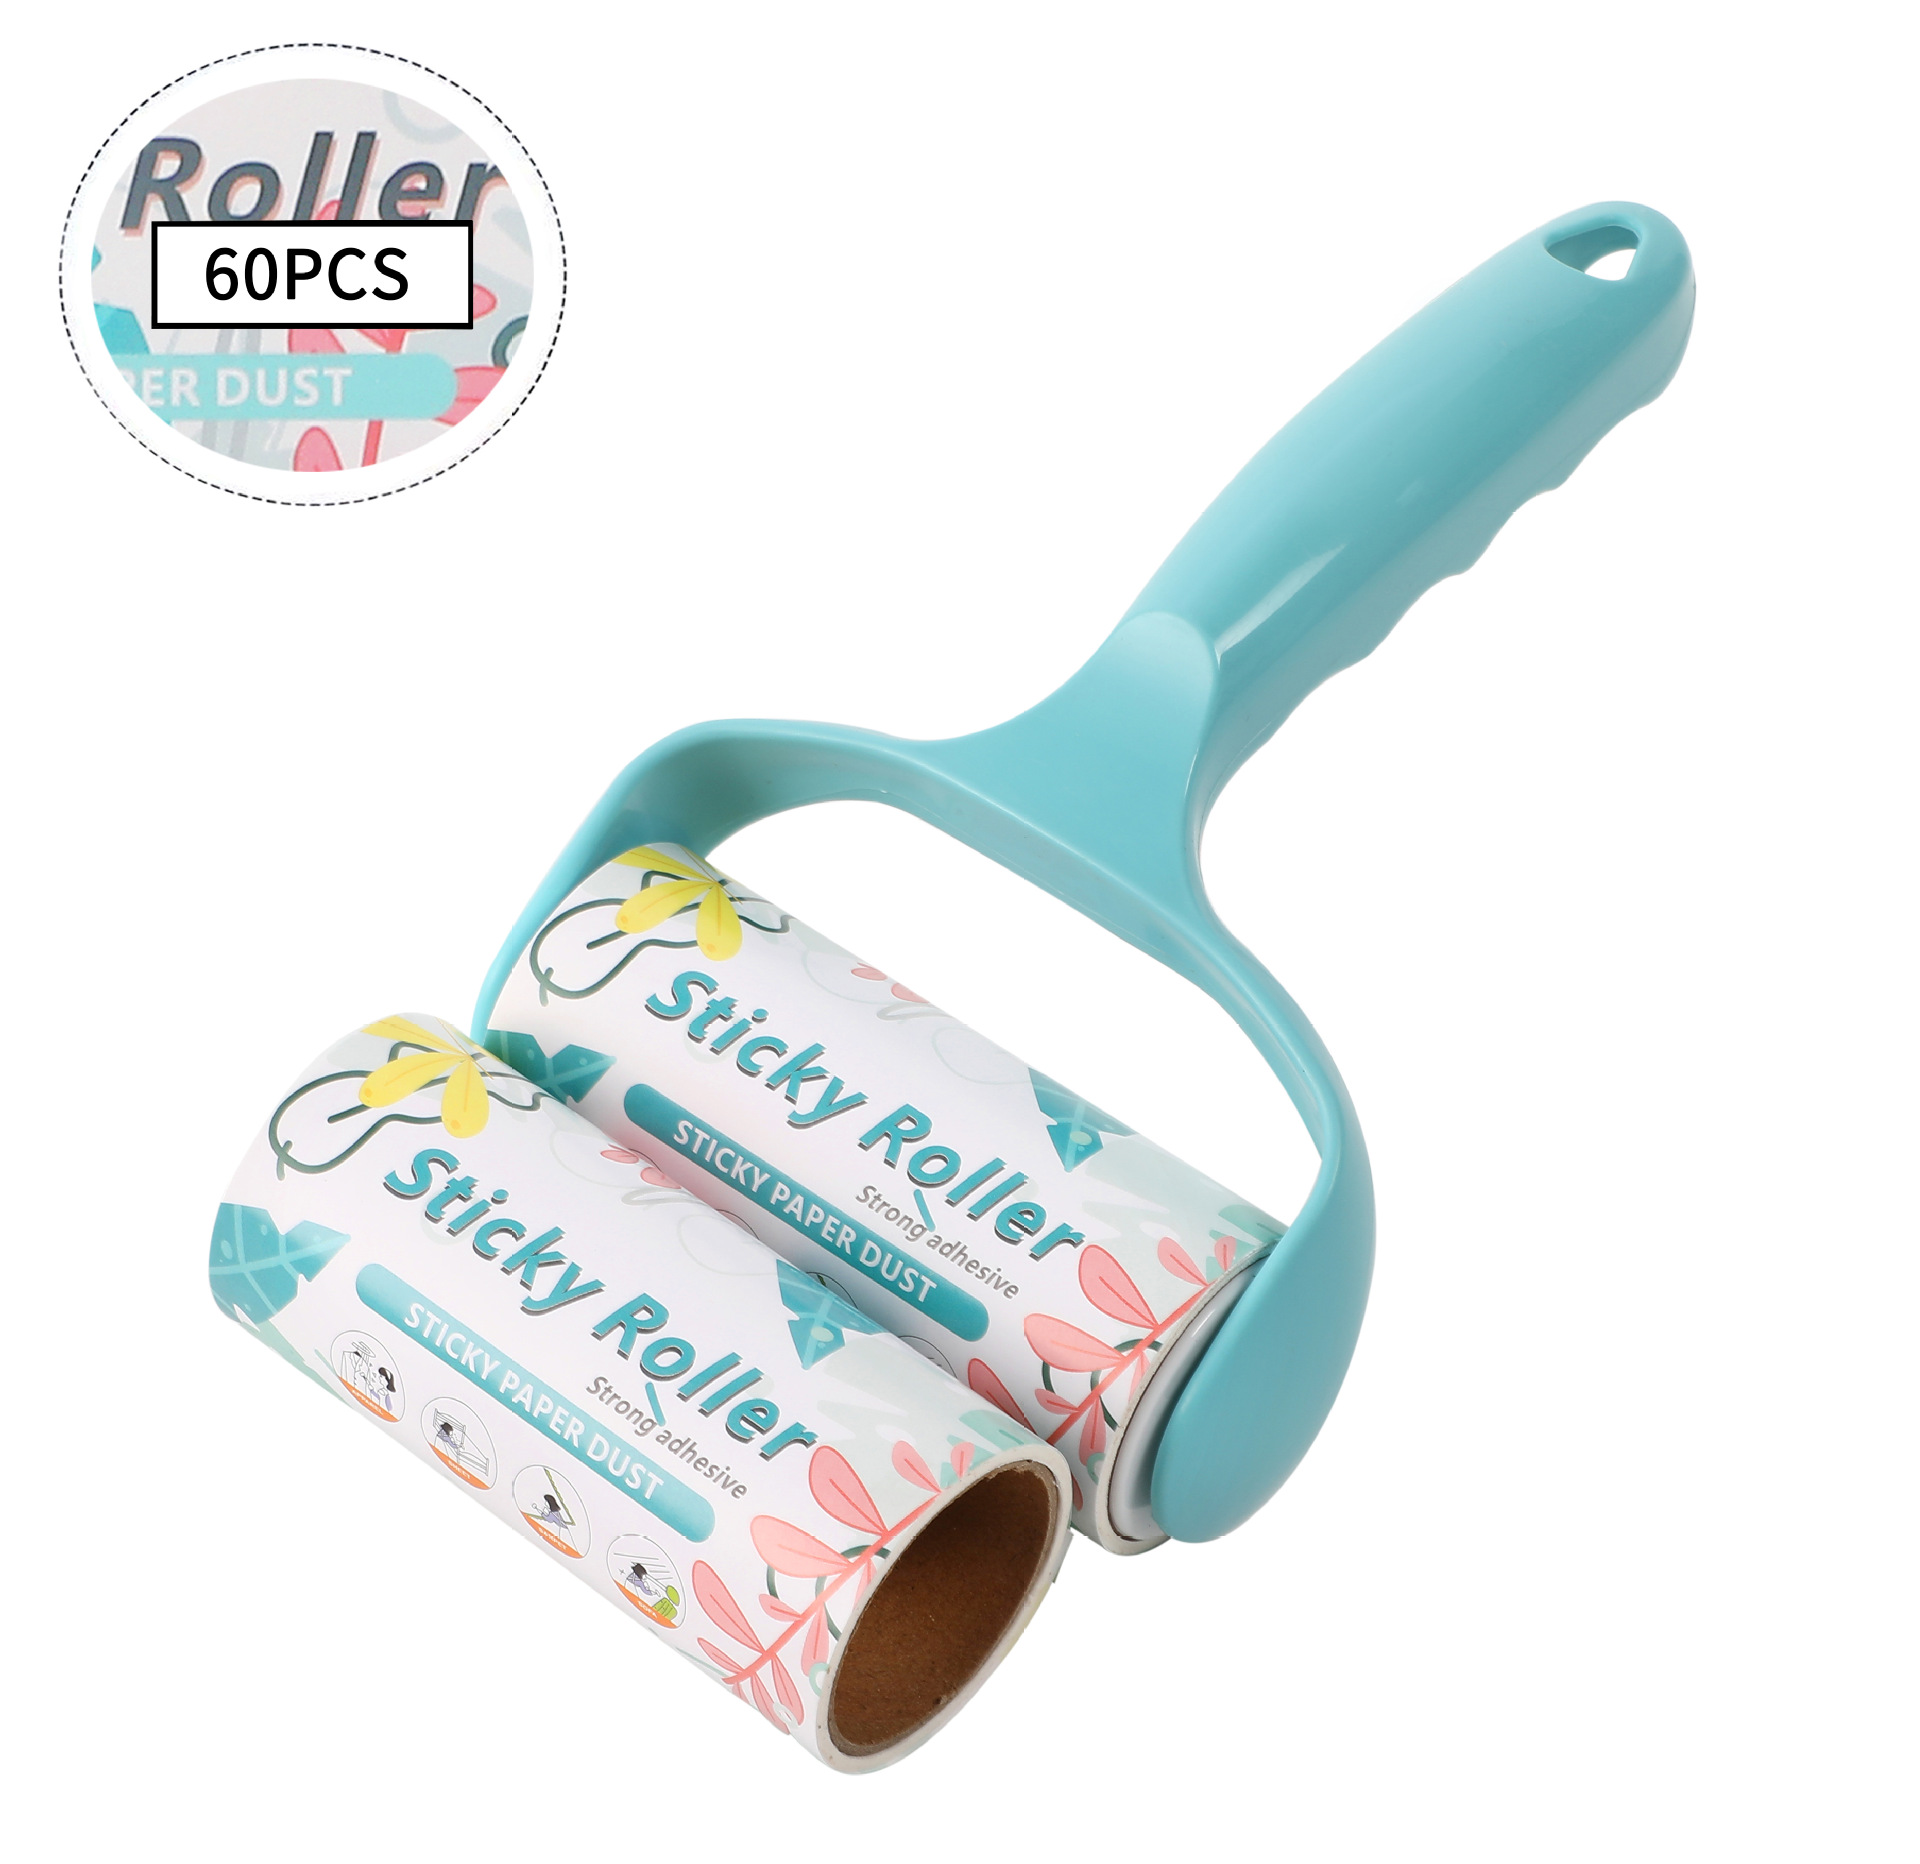 Hair Sticking Paper Rolls Lent Remover Tearable Roller Felt Rolling Brush Sticky Hair Hair Cleaning Fantastic Roller Hair Removal Clothes Hair Removal Hair Collecting Sticky Brush